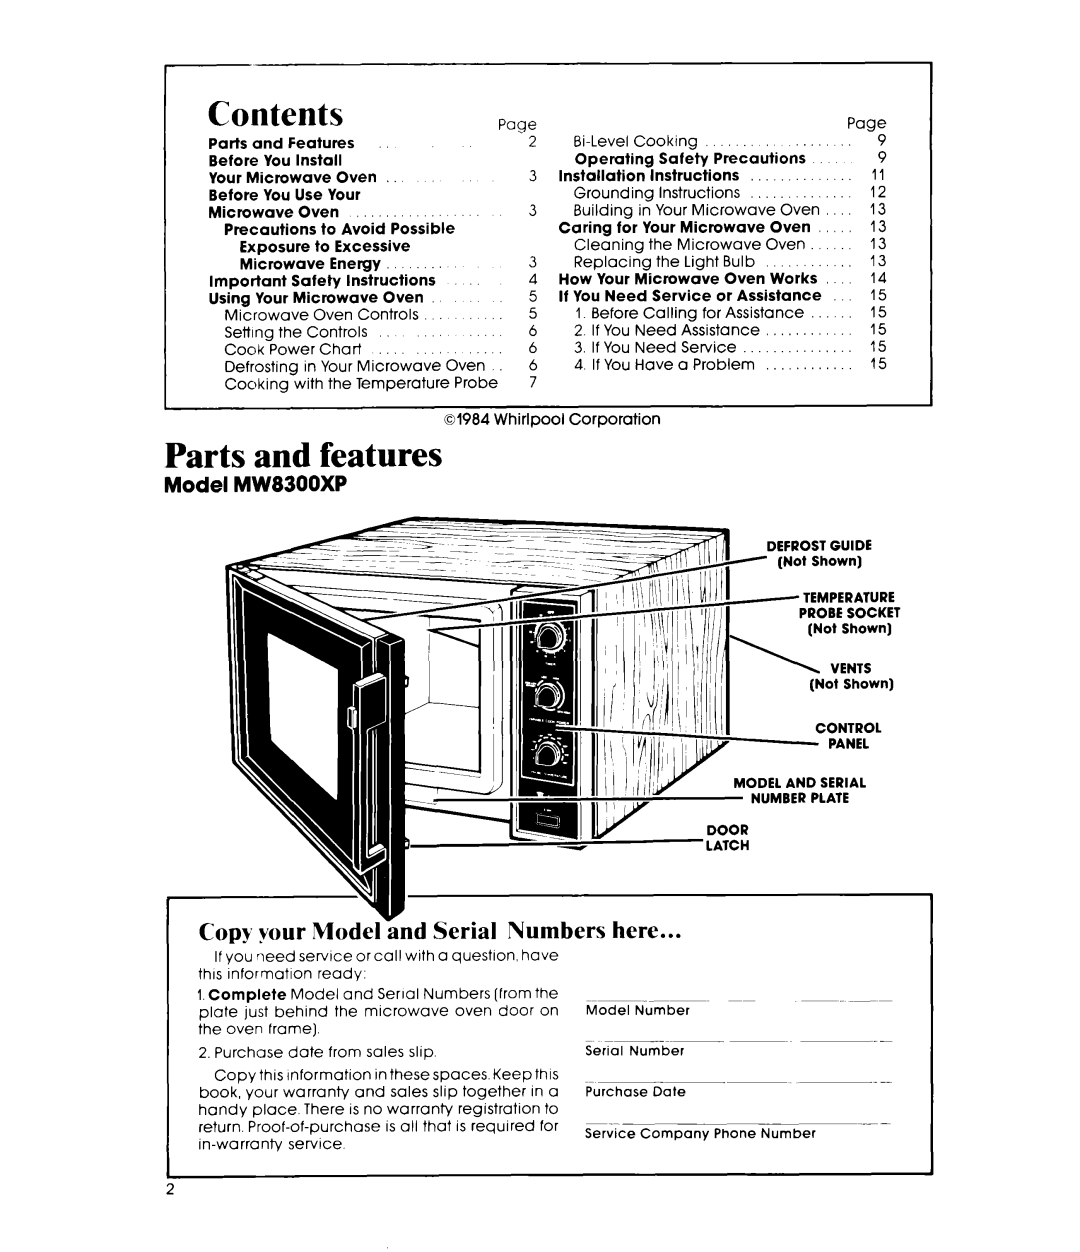 Whirlpool manual Contents, Parts and features, Copy your Model and Serial Numbers here, Model MW8300XP, Pace 